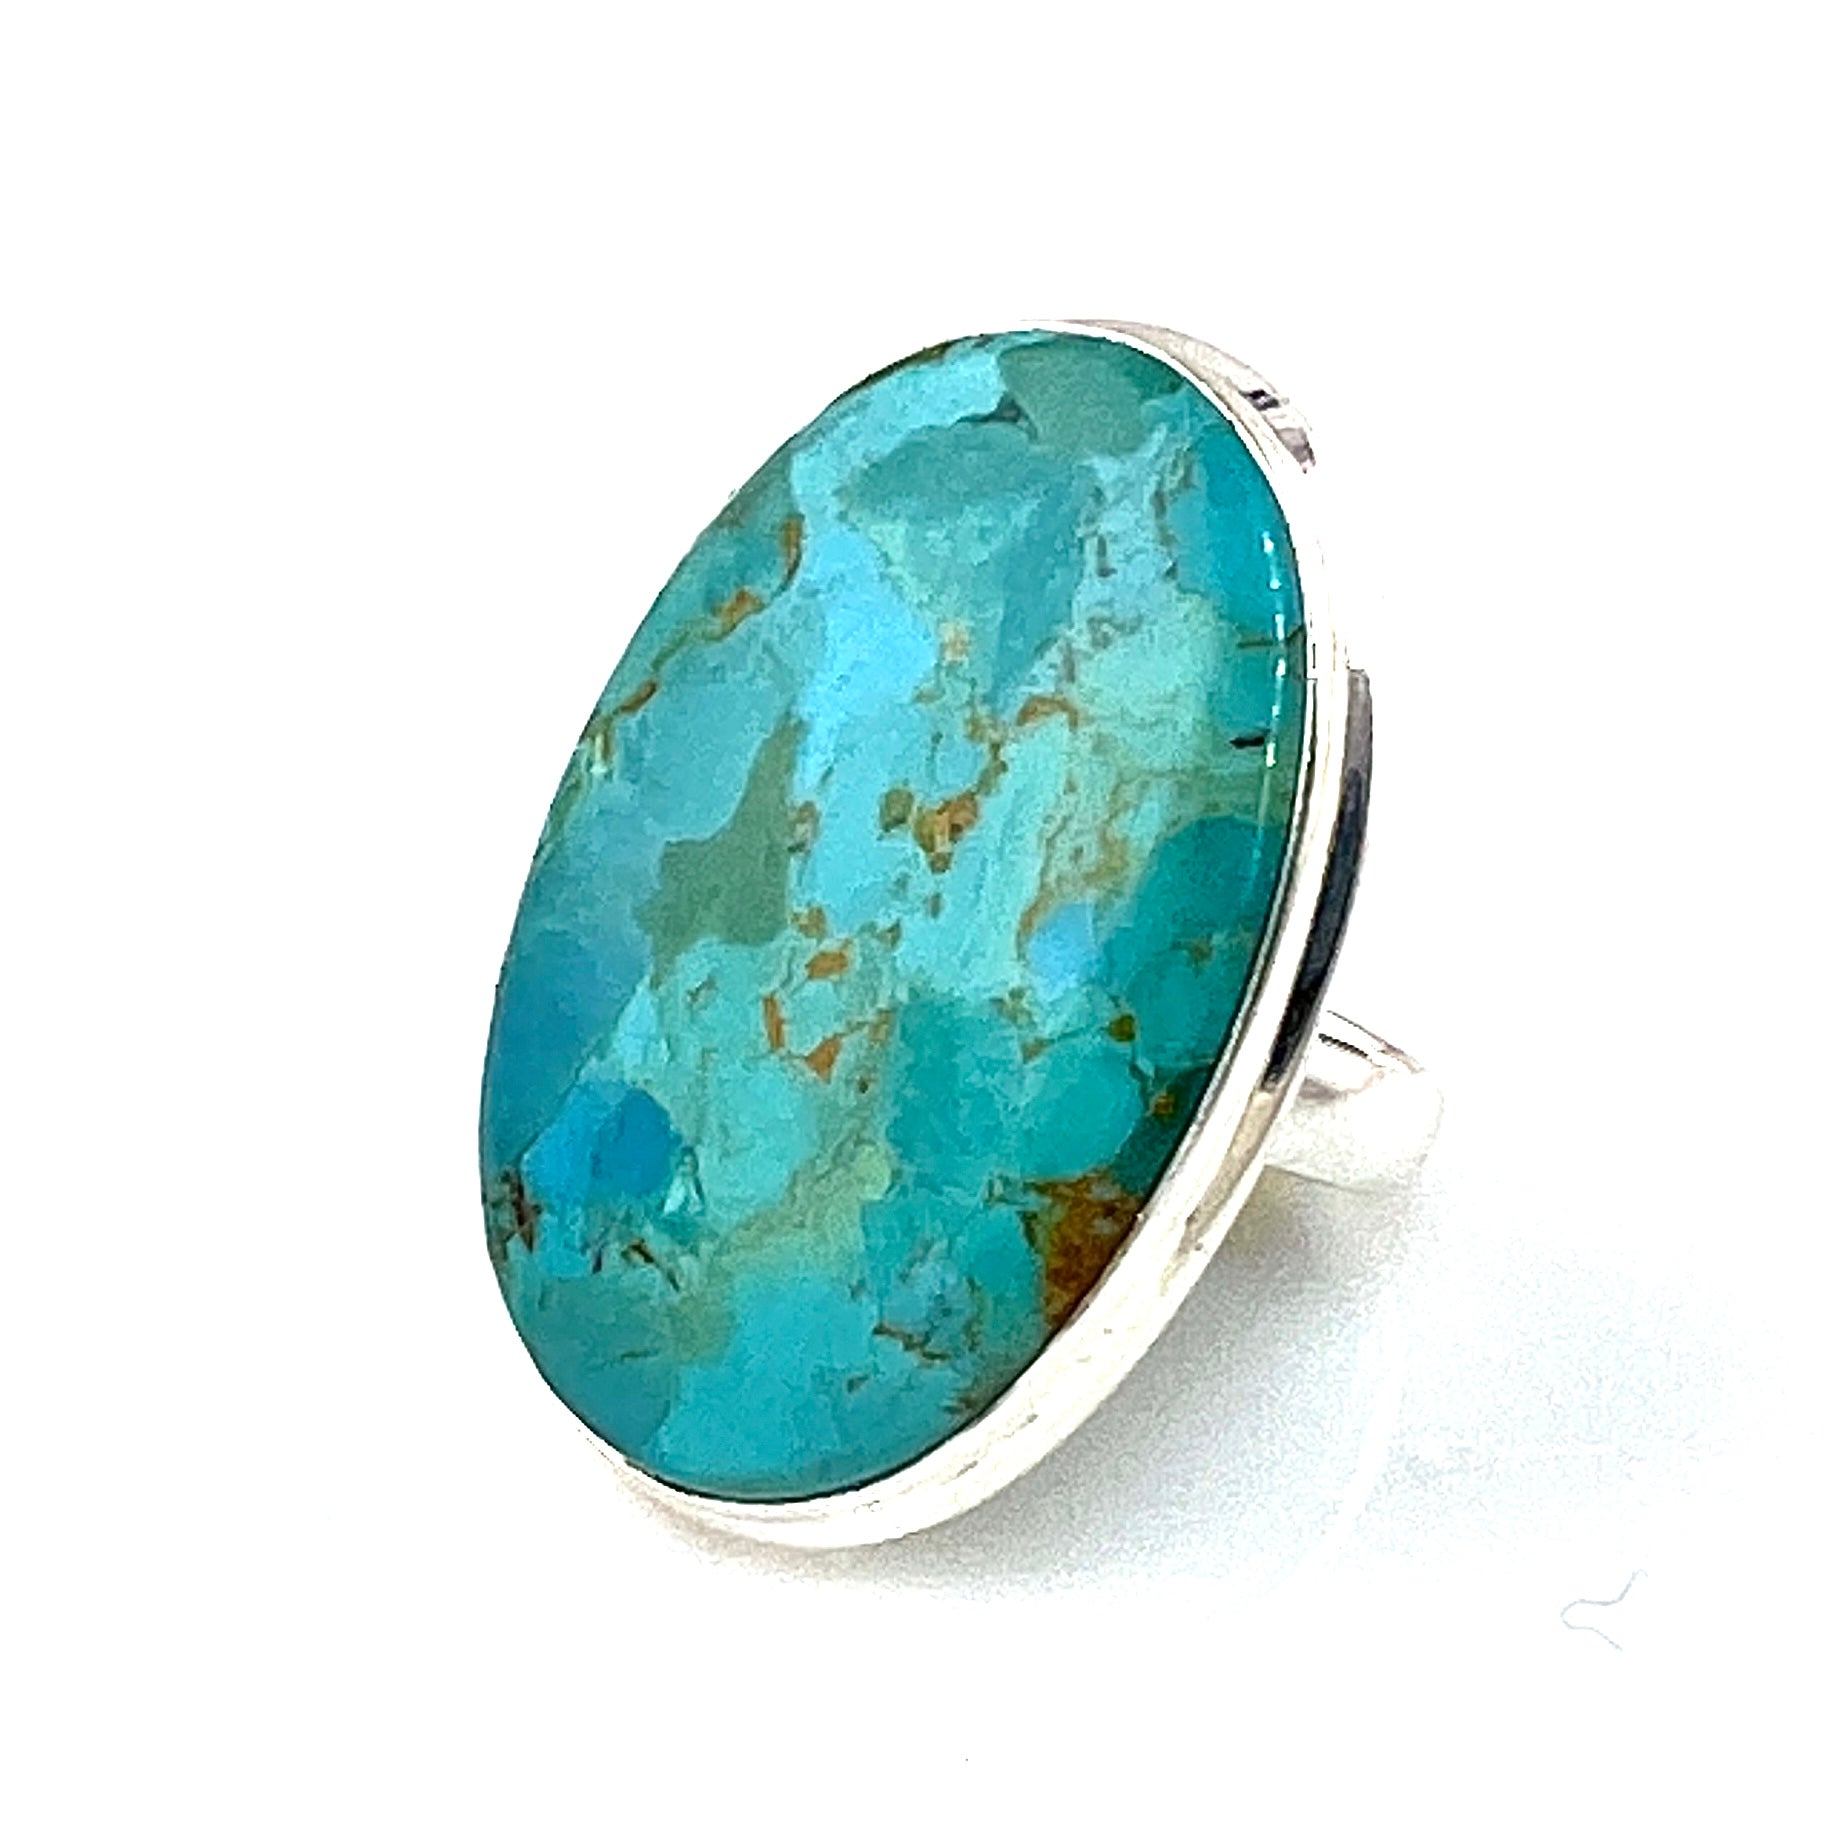 Huge Blue Turquoise Oval Sterling Silver Ring - Keja Designs Jewelry